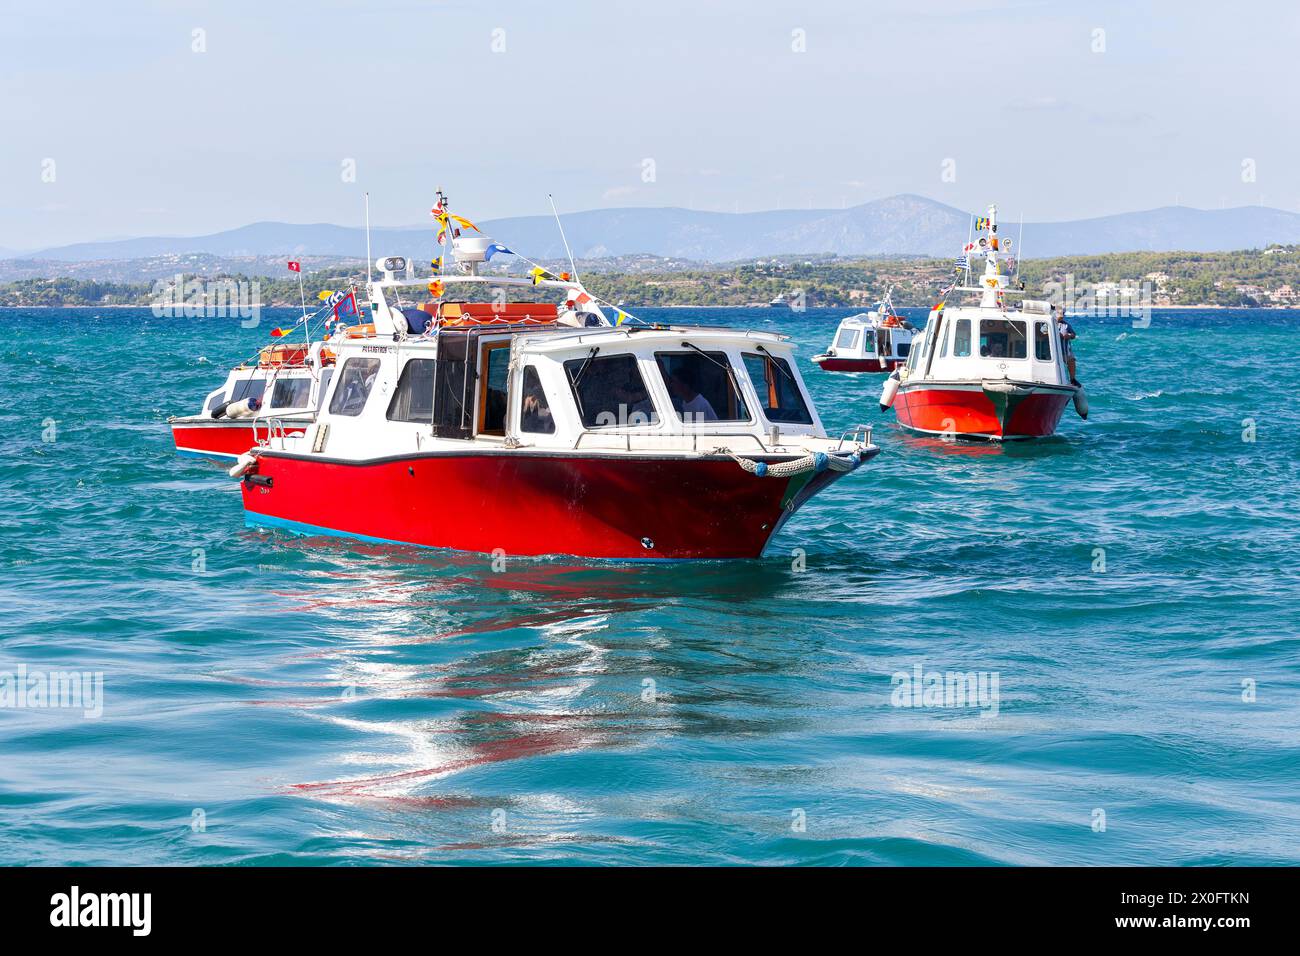 Sea taxis at the small port of Dapia, in Spetses island, Greece, on the day of the Armata, the most popular local festival. Stock Photo